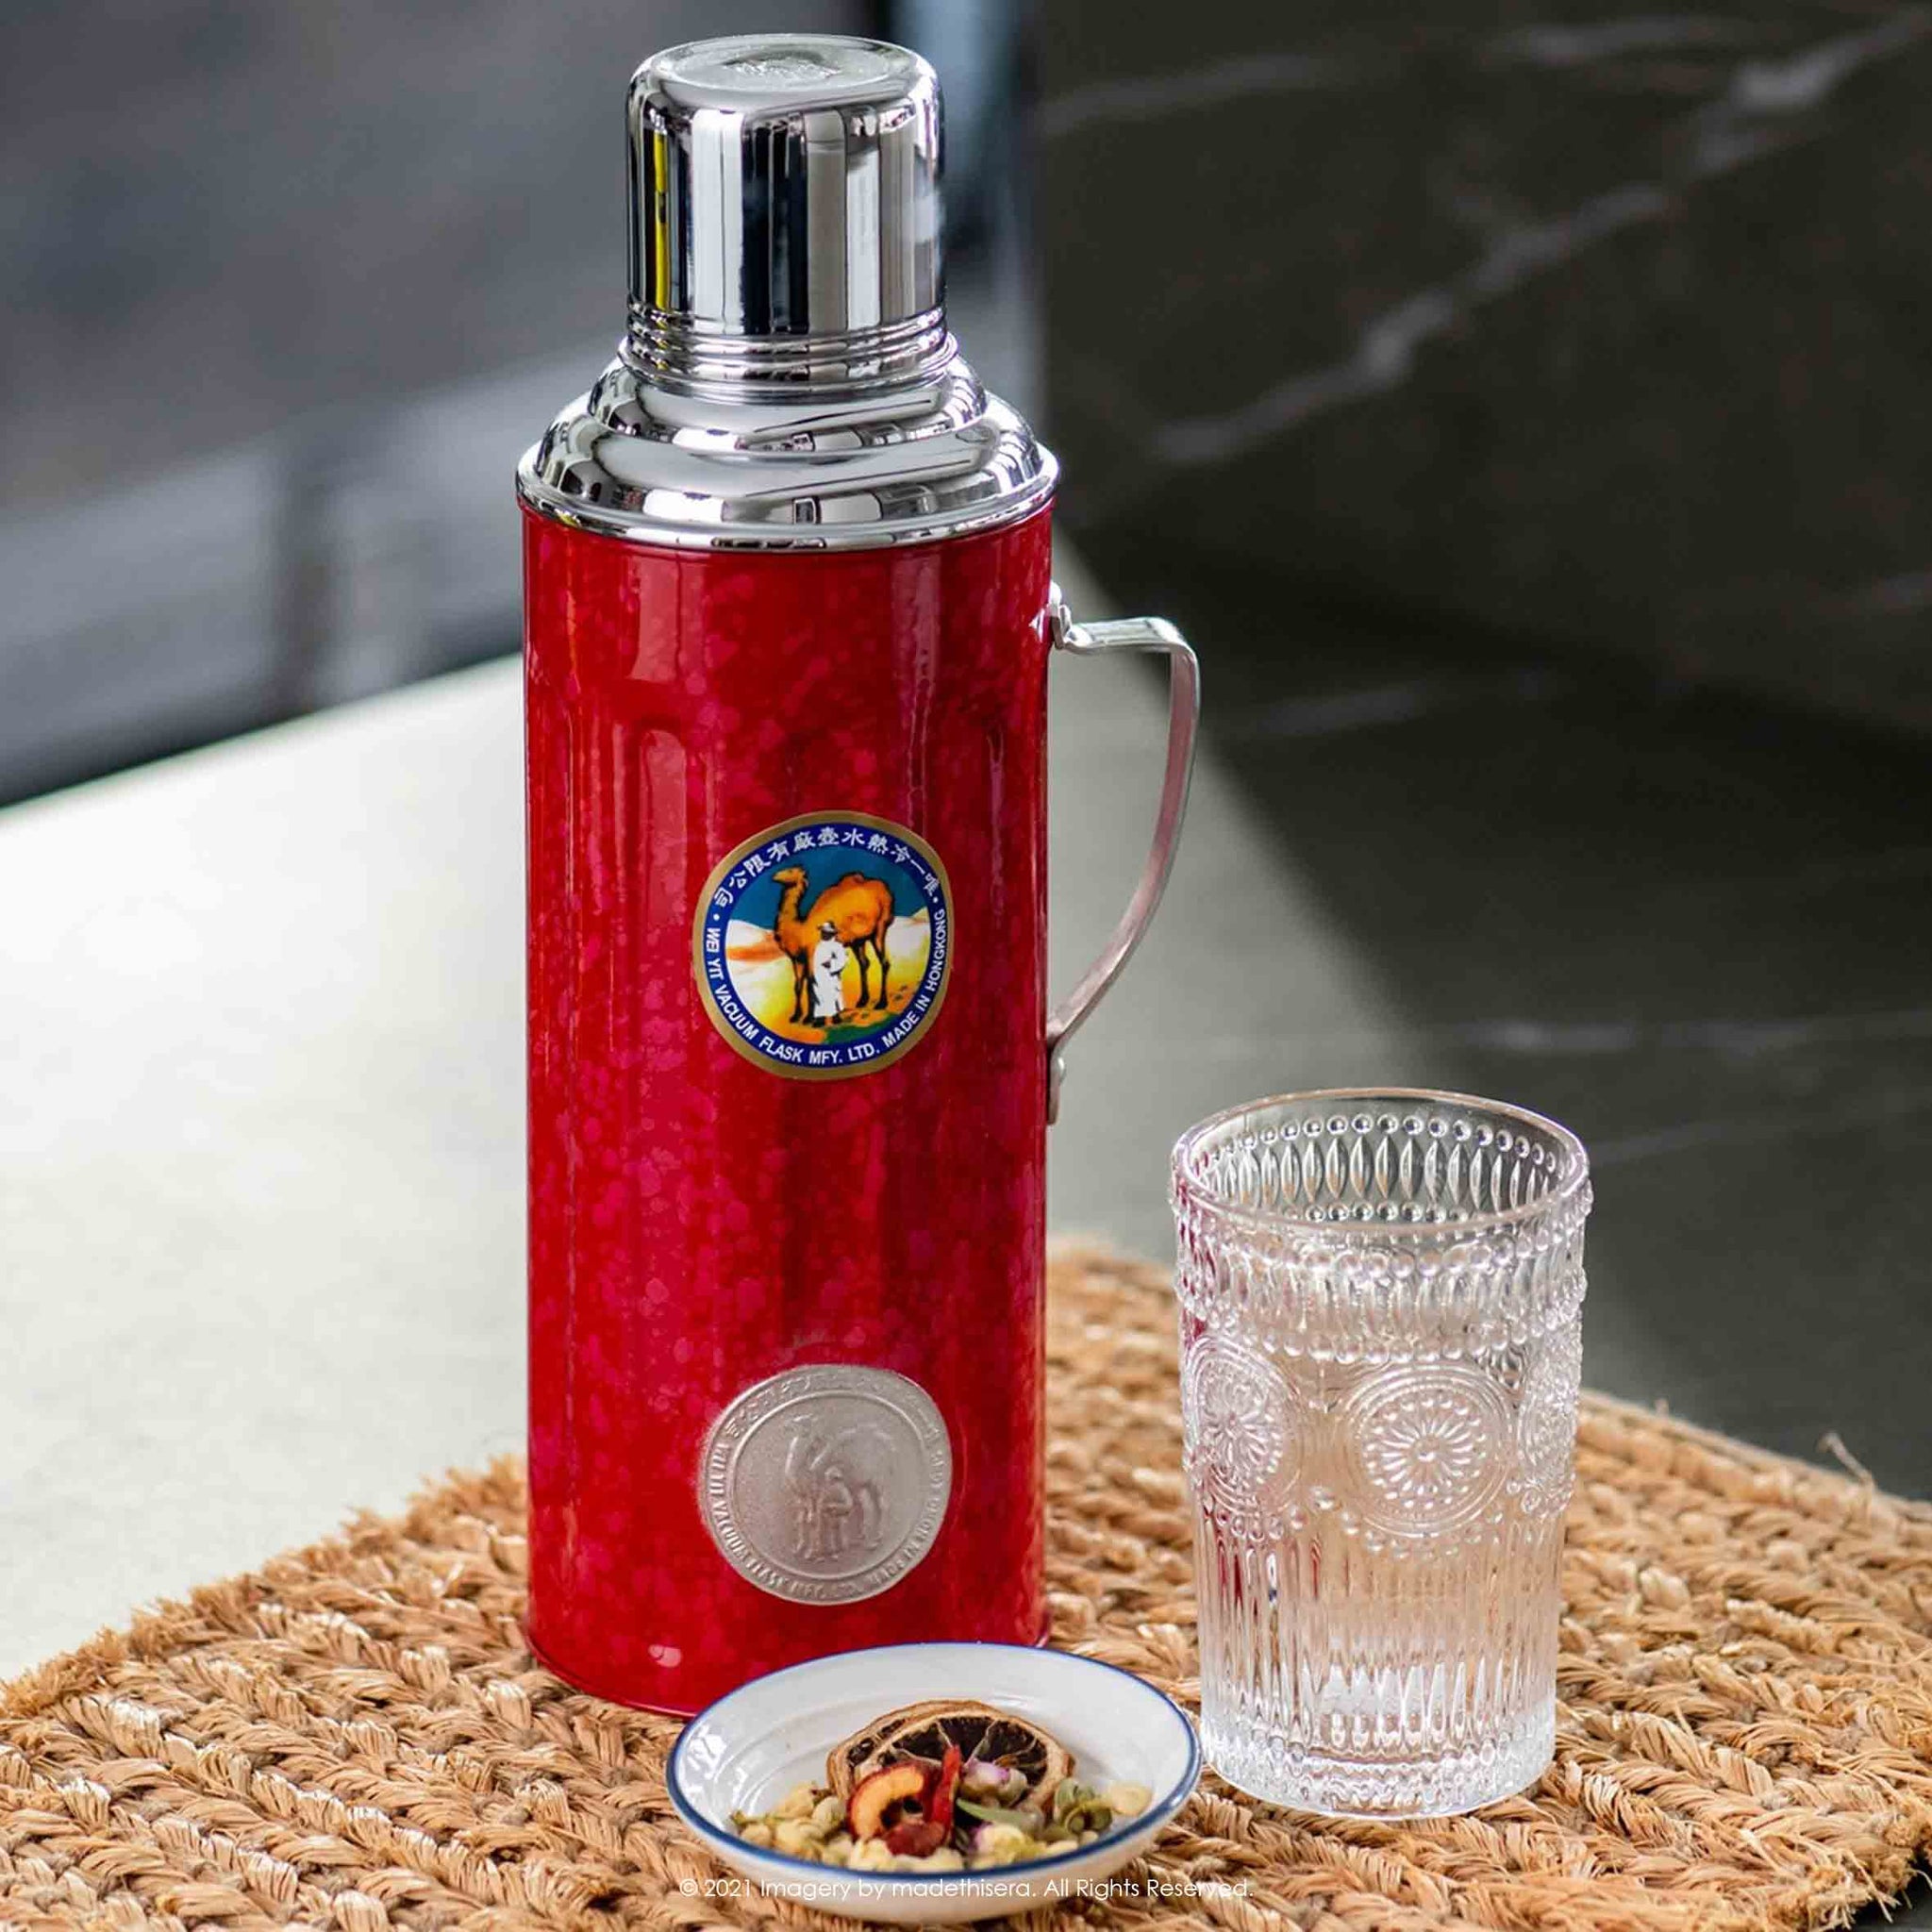 Camel 駱駝牌 331 Vacuum Thermal Flask 真空保溫壺 331RD 1.1L (Red 紅) [Double Glass Wall Thermos Bottle 雙層玻璃暖水樽]